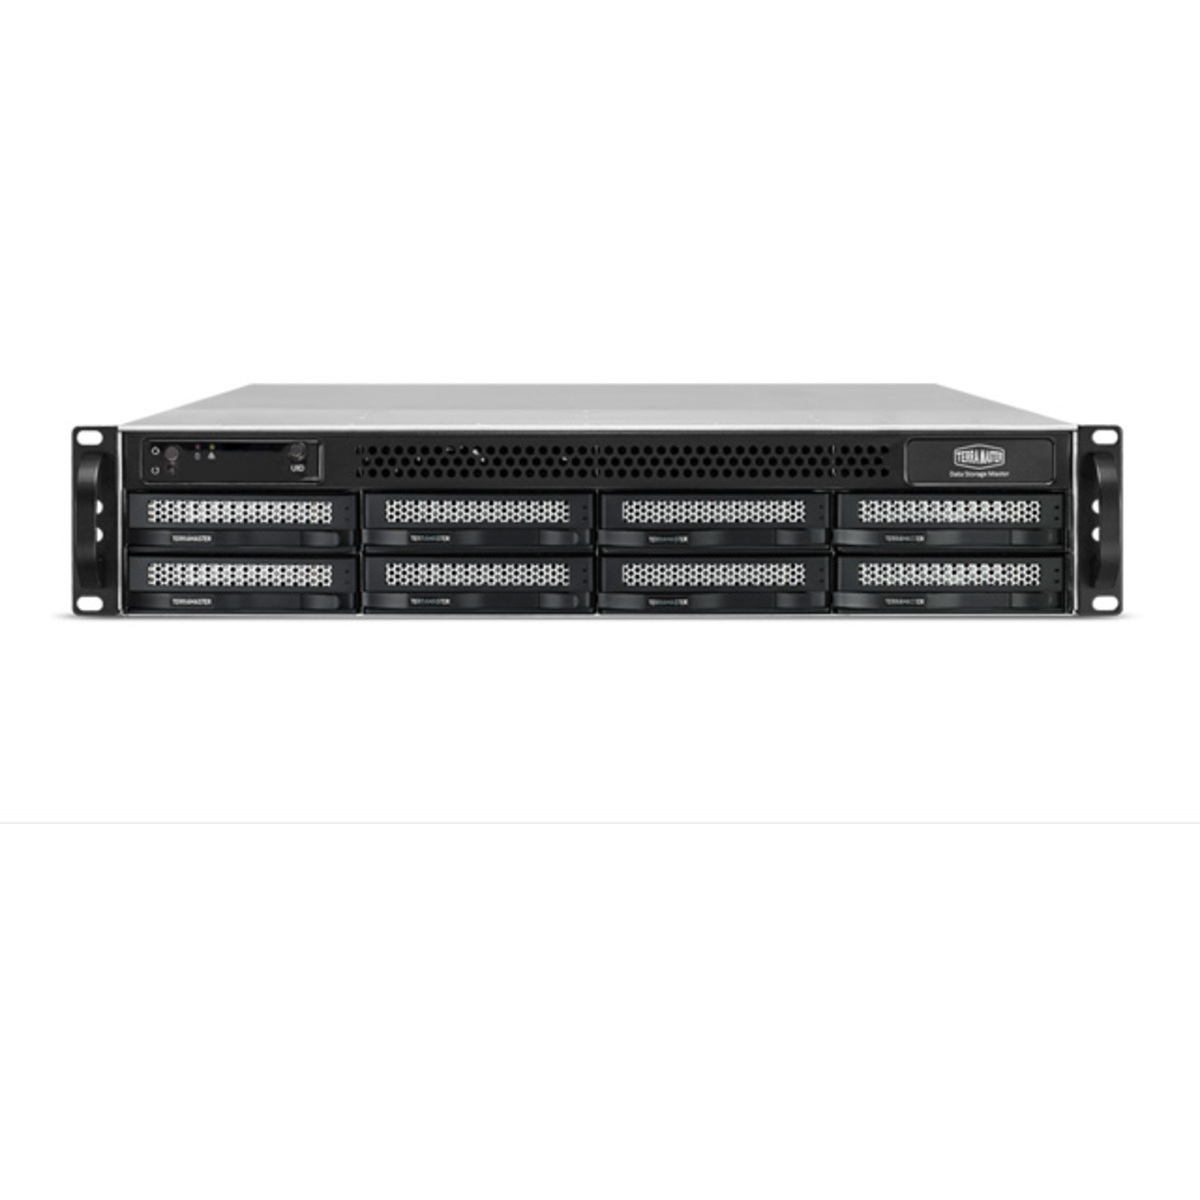 TerraMaster U8-423 42tb 8-Bay RackMount Multimedia / Power User / Business NAS - Network Attached Storage Device 7x6tb Western Digital Red WD60EFAX 3.5 5400rpm SATA 6Gb/s HDD NAS Class Drives Installed - Burn-In Tested - FREE RAM UPGRADE U8-423